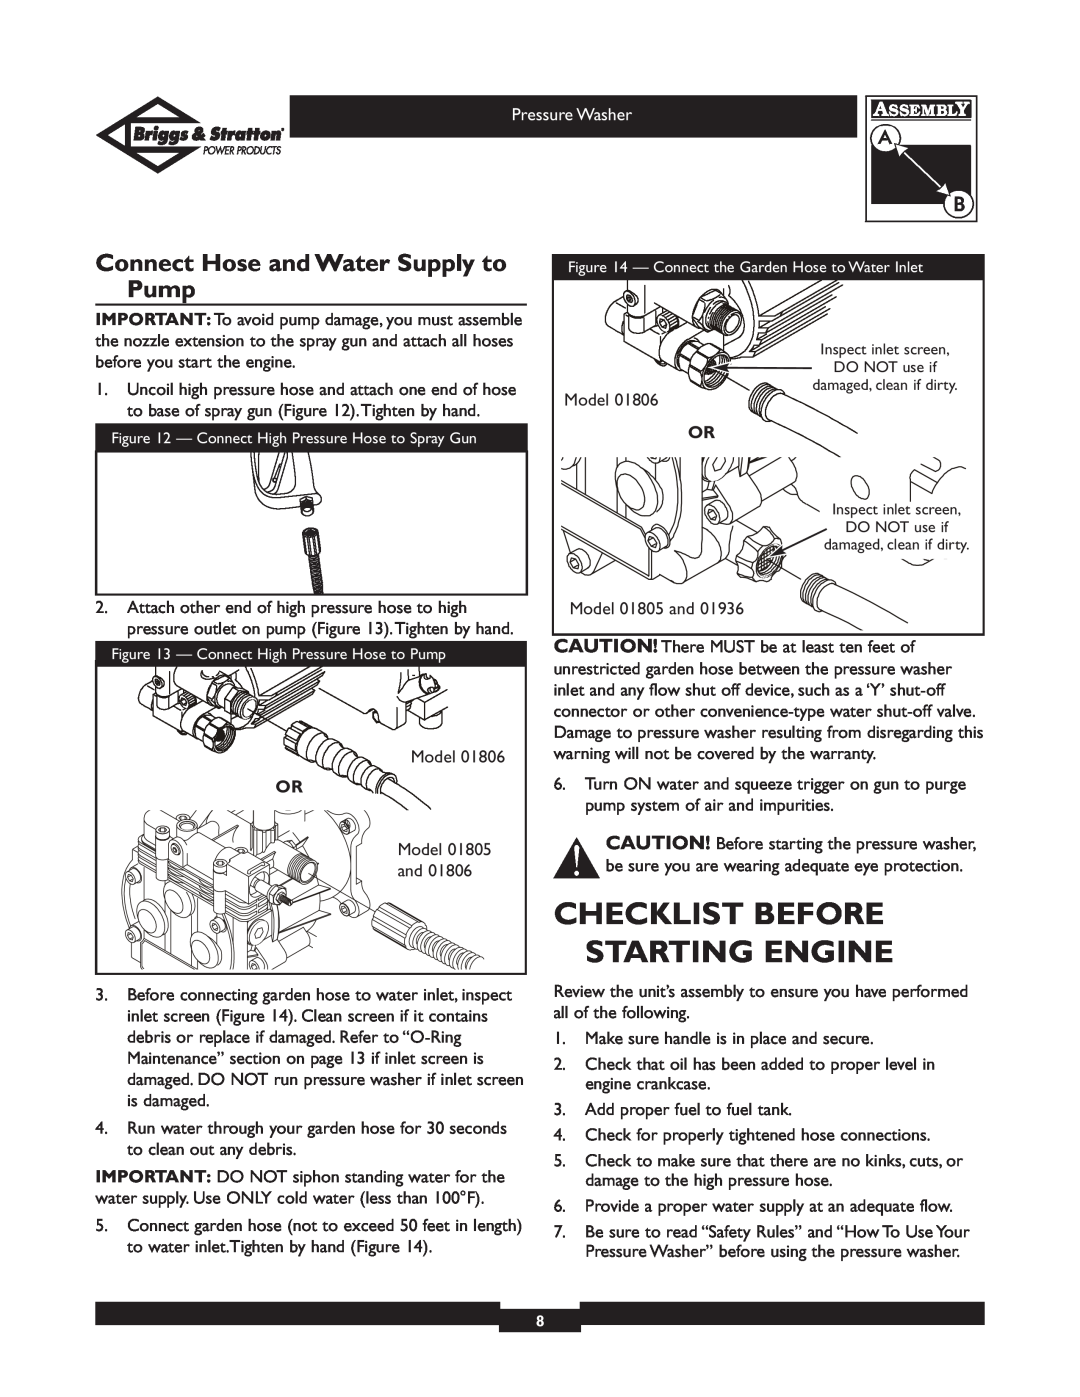 Briggs & Stratton 01936 owner manual Checklist Before Starting Engine, Connect Hose and Water Supply to Pump 